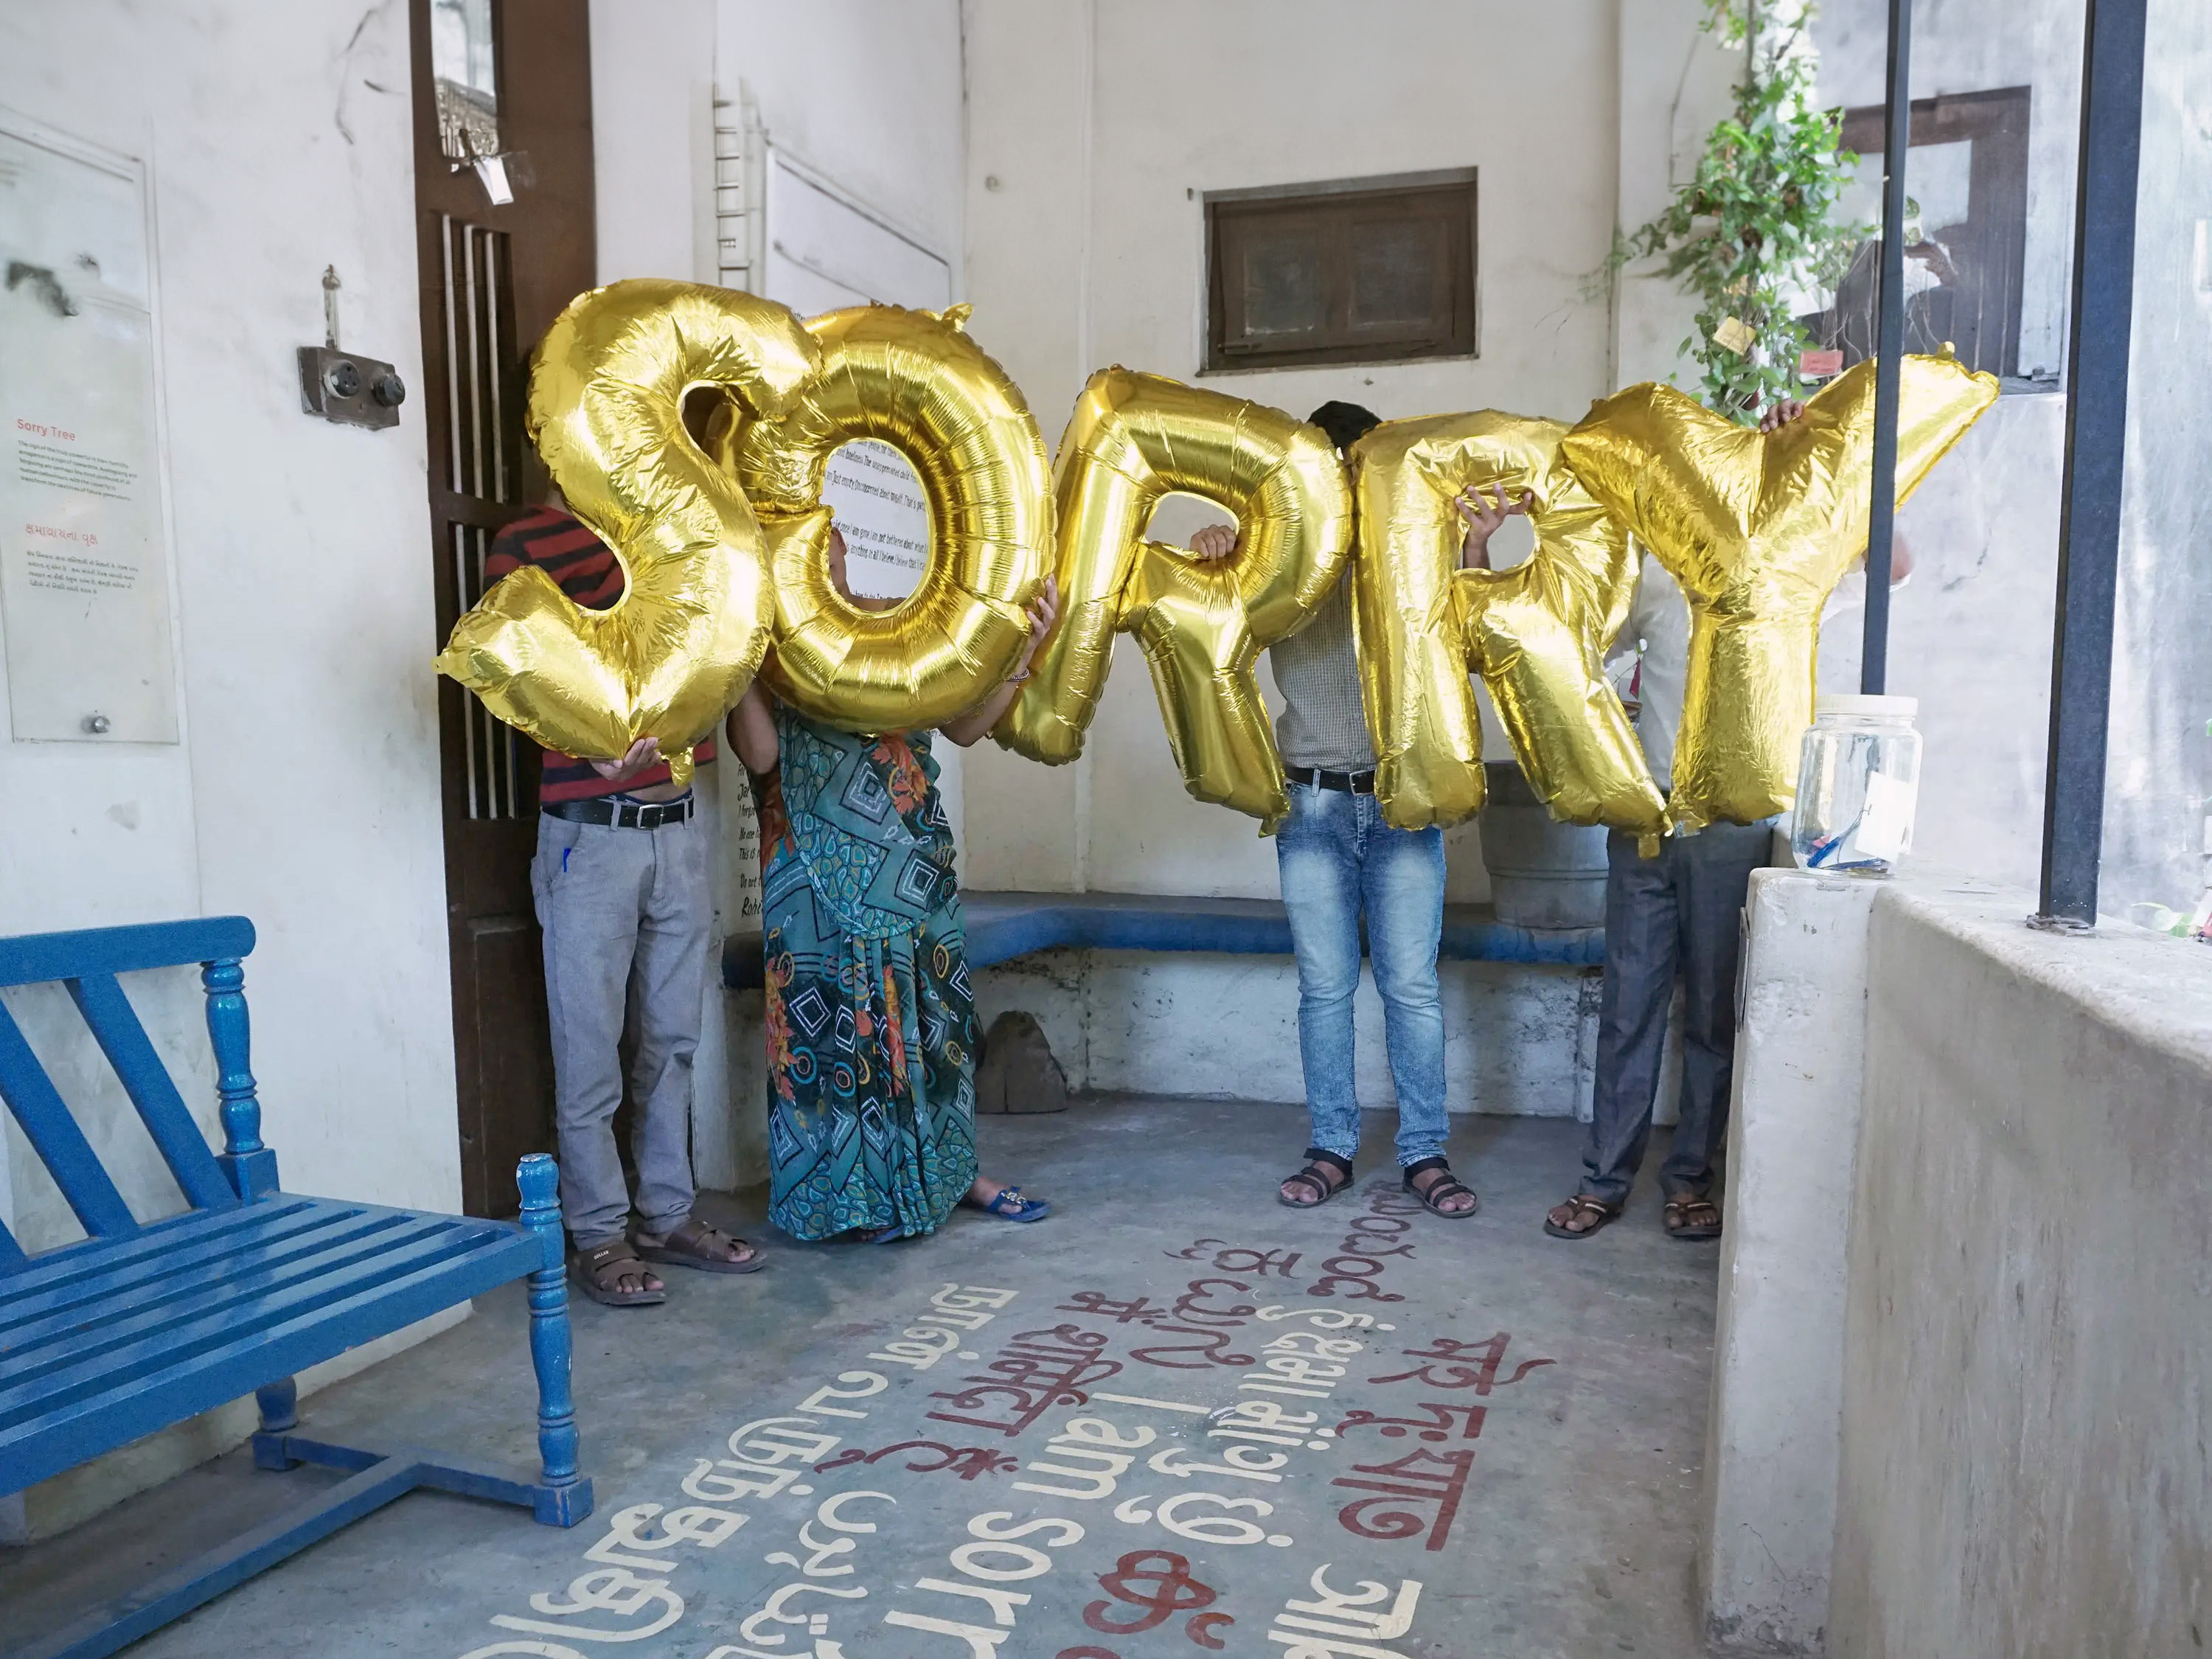 India-Ahmedabad-Sorry-2019-workshop-Museum-of-Conflict, Silence was Golden, gold balloons